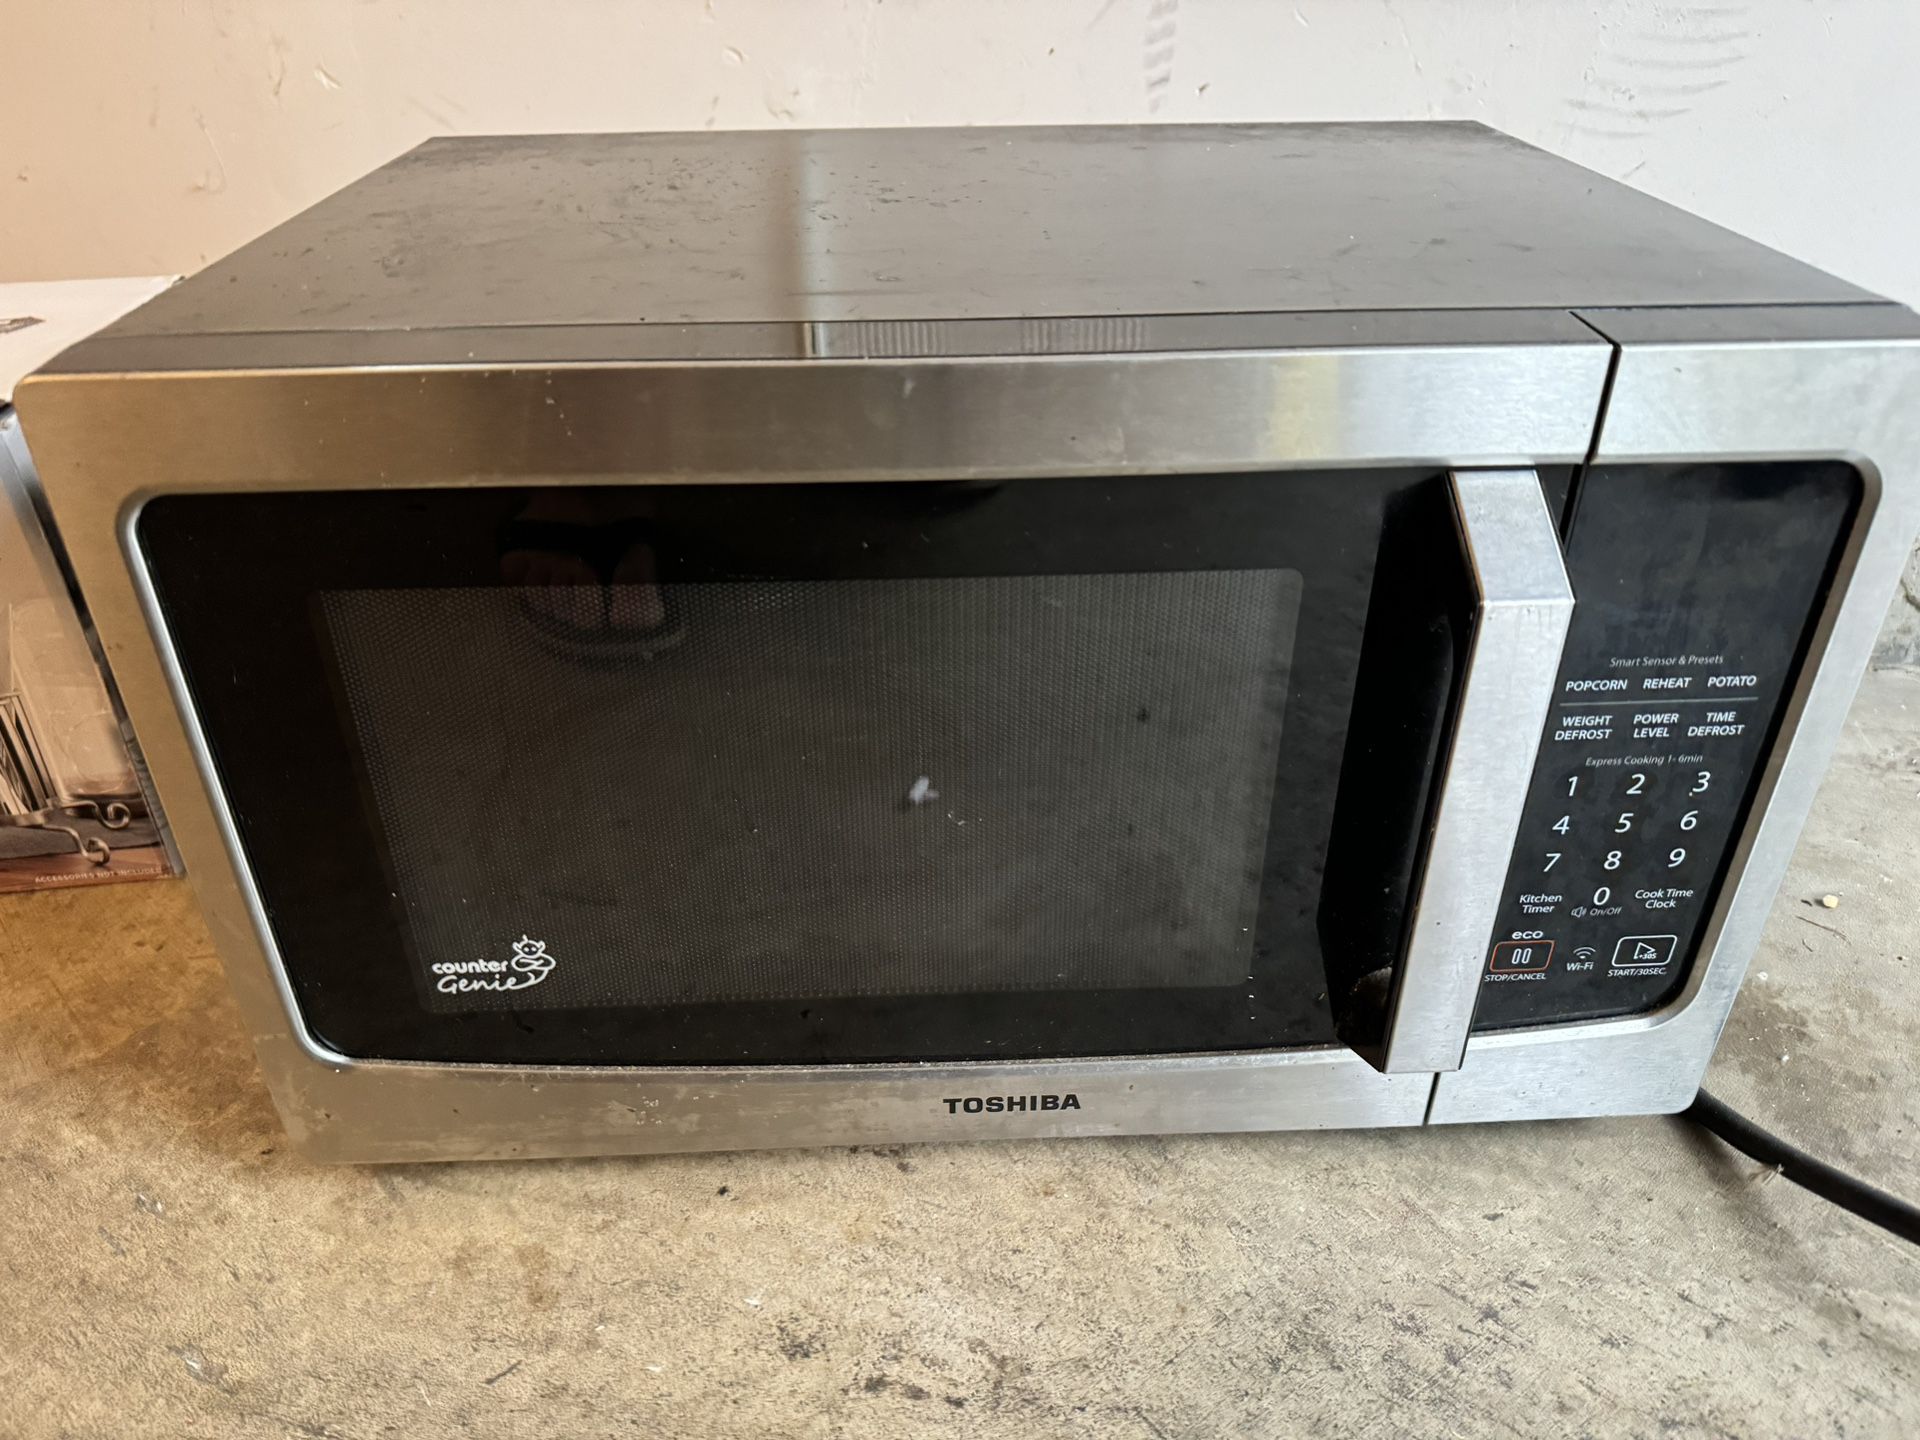 Working Microwave For Only $78